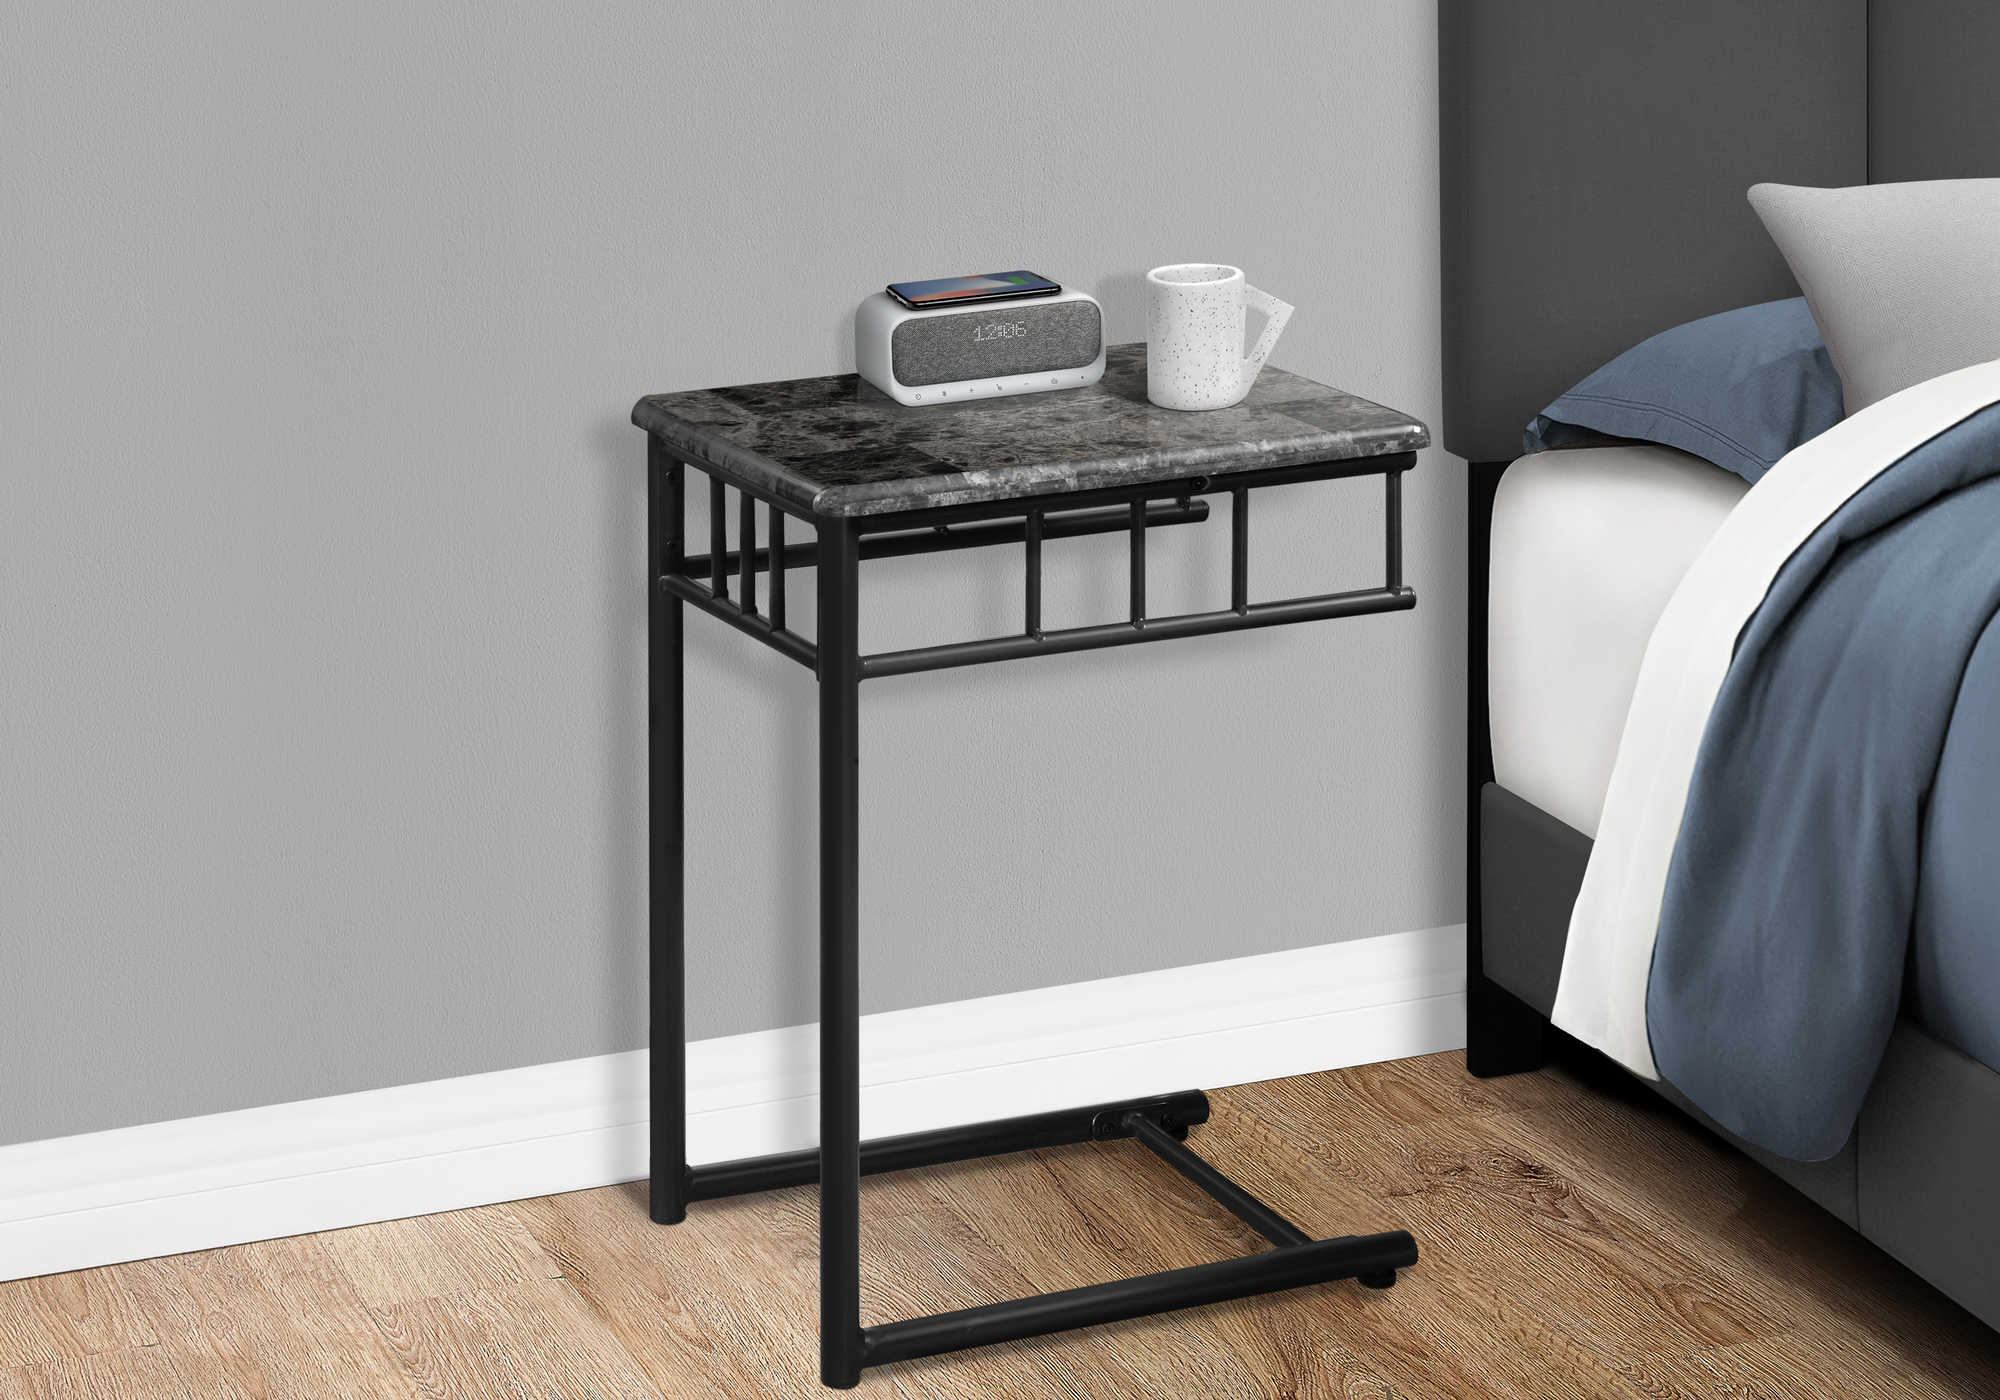 BEDROOM ACCENT TABLE - GREY MARBLE / CHARCOAL METAL